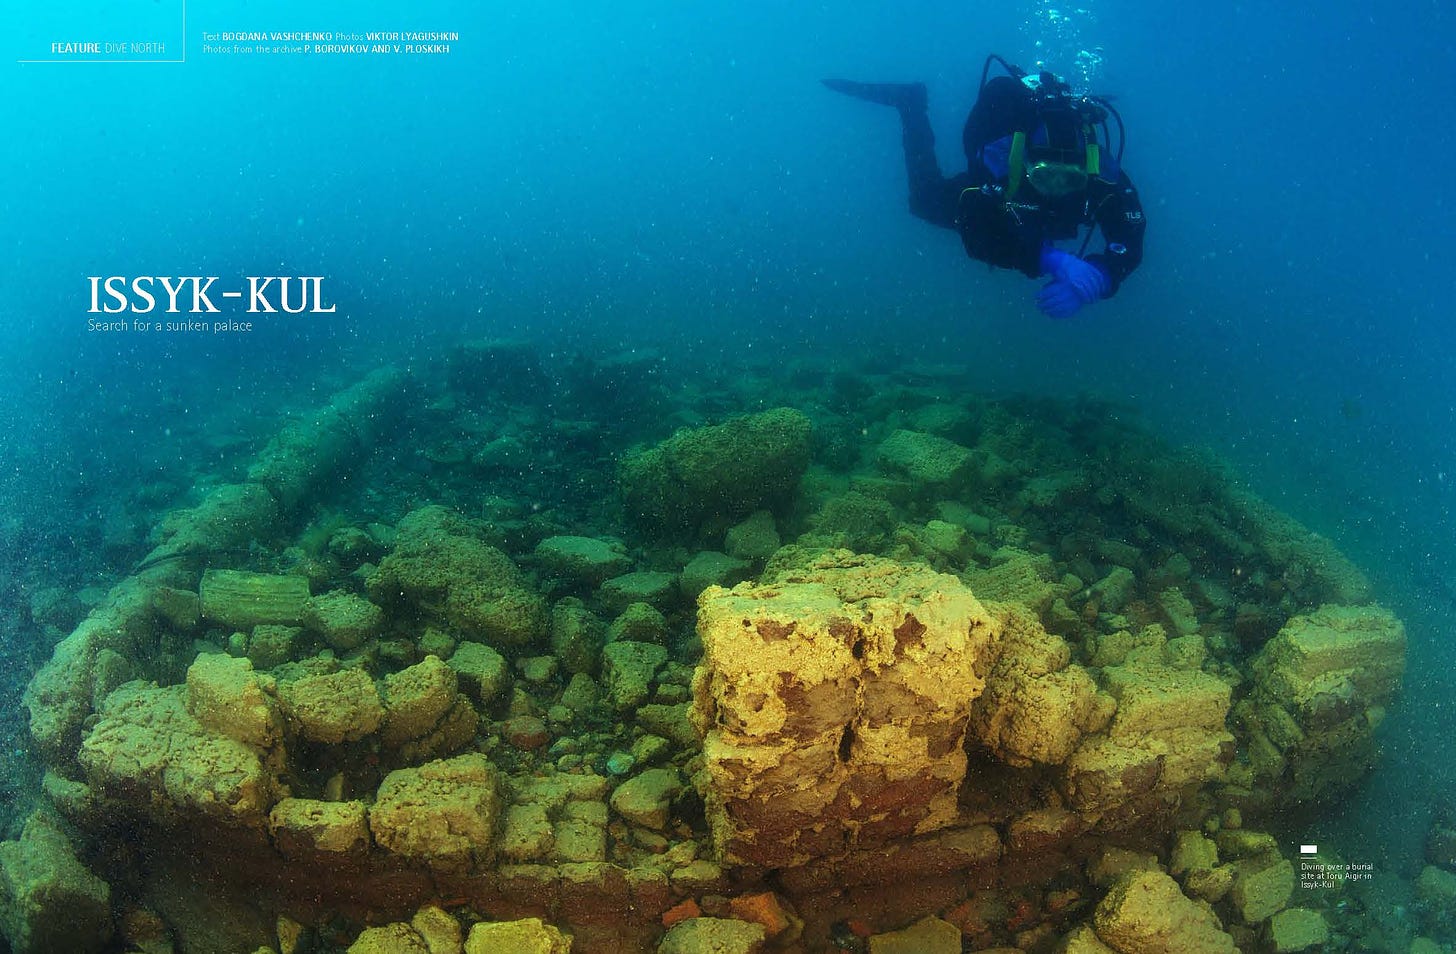 Issyk-Kul: Search for Sunken Palace | Photo Projects by Phototeam.pro